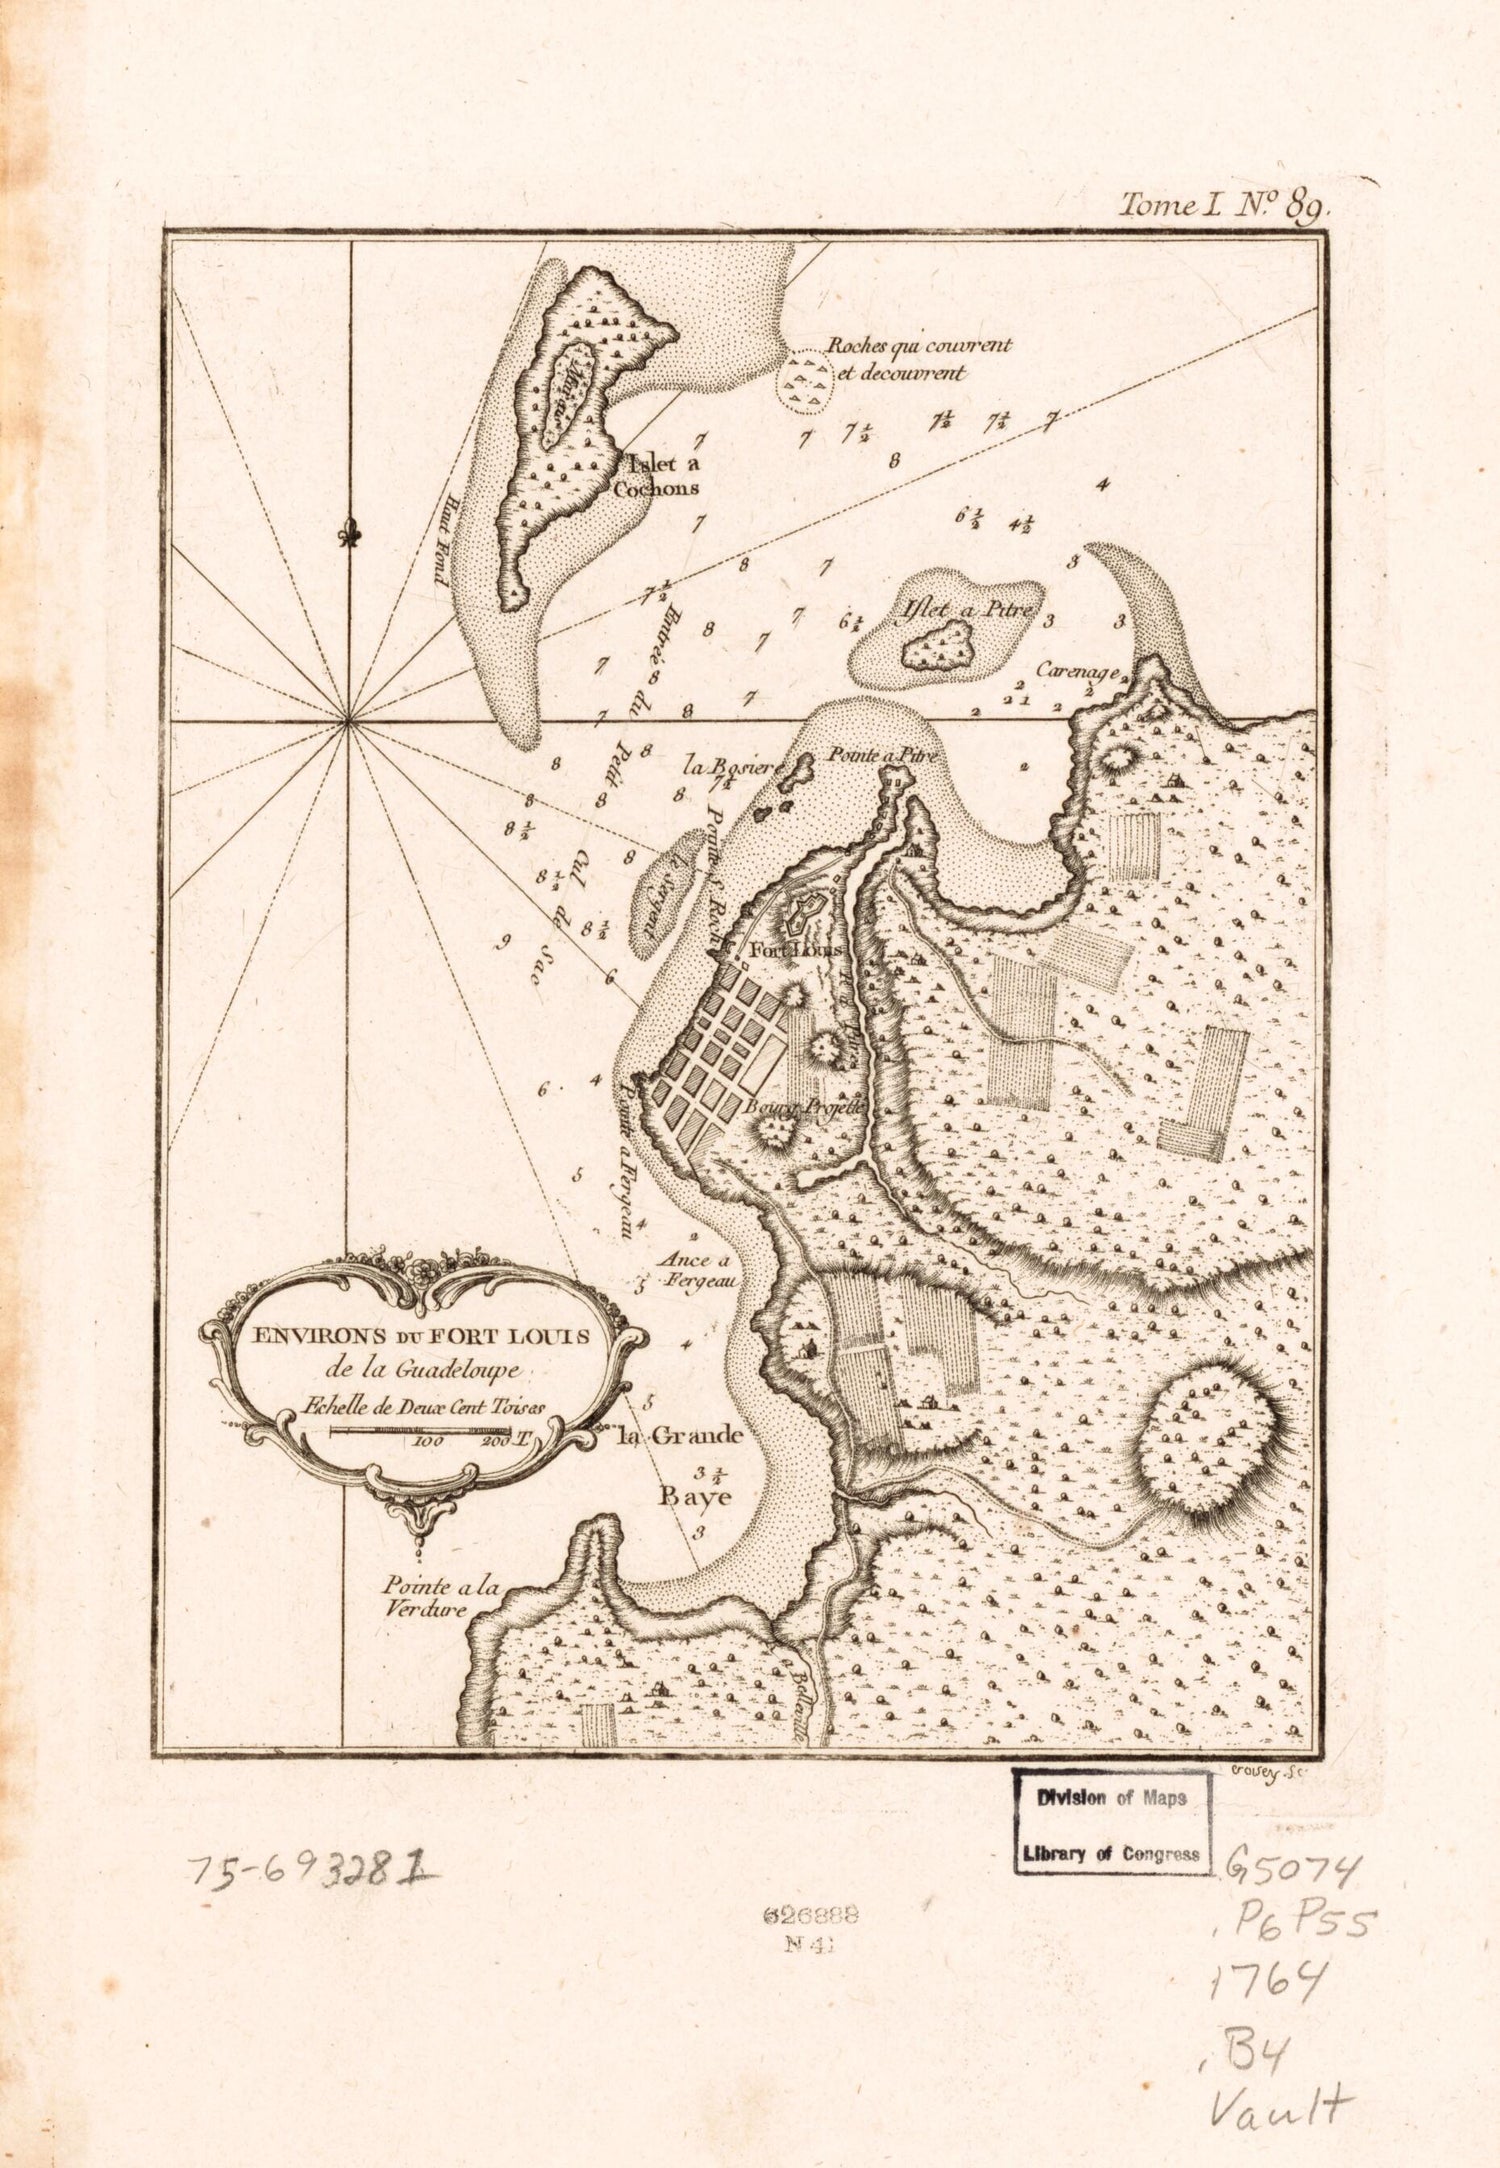 This old map of Environs Du Fort Louis De La Guadeloupe from 1764 was created by Jacques Nicolas] [Bellin, P. Croisey in 1764